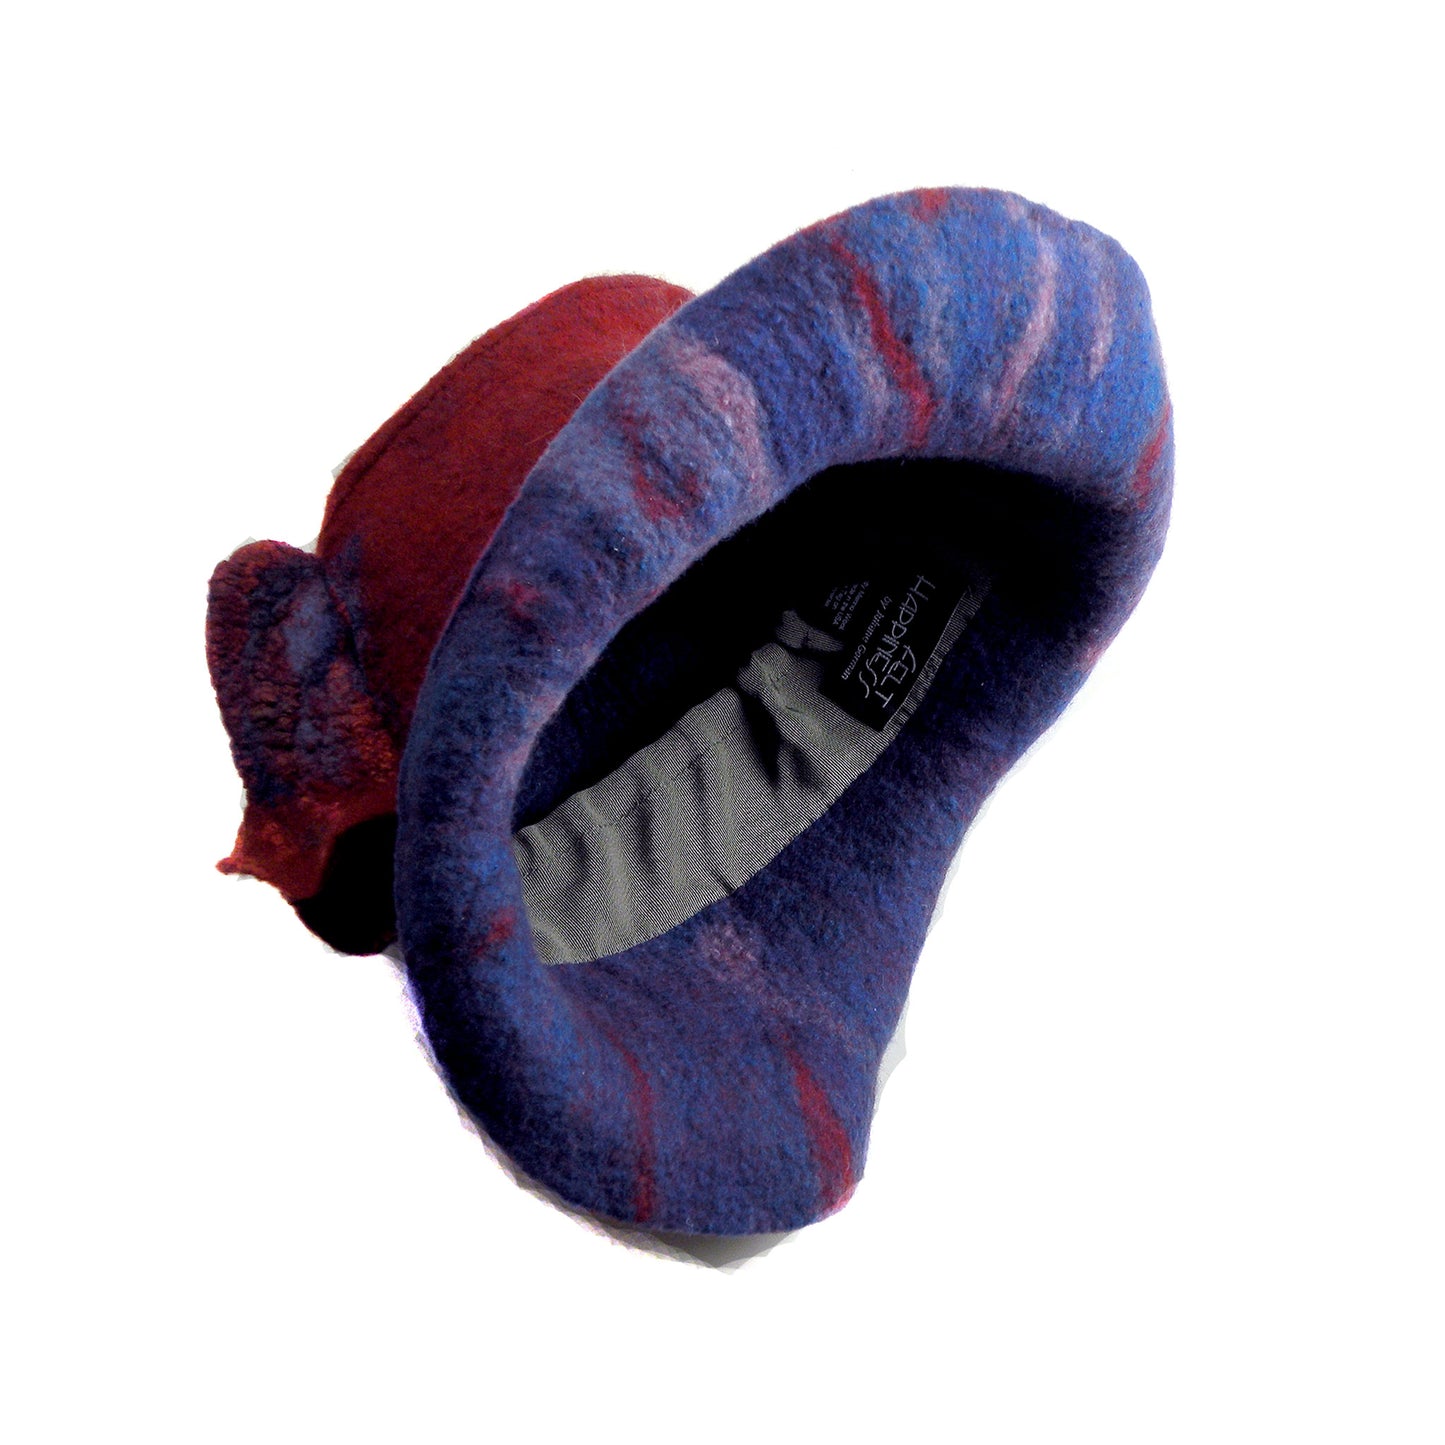 Big Brimmed Red and Blue Felted Hat - inside view